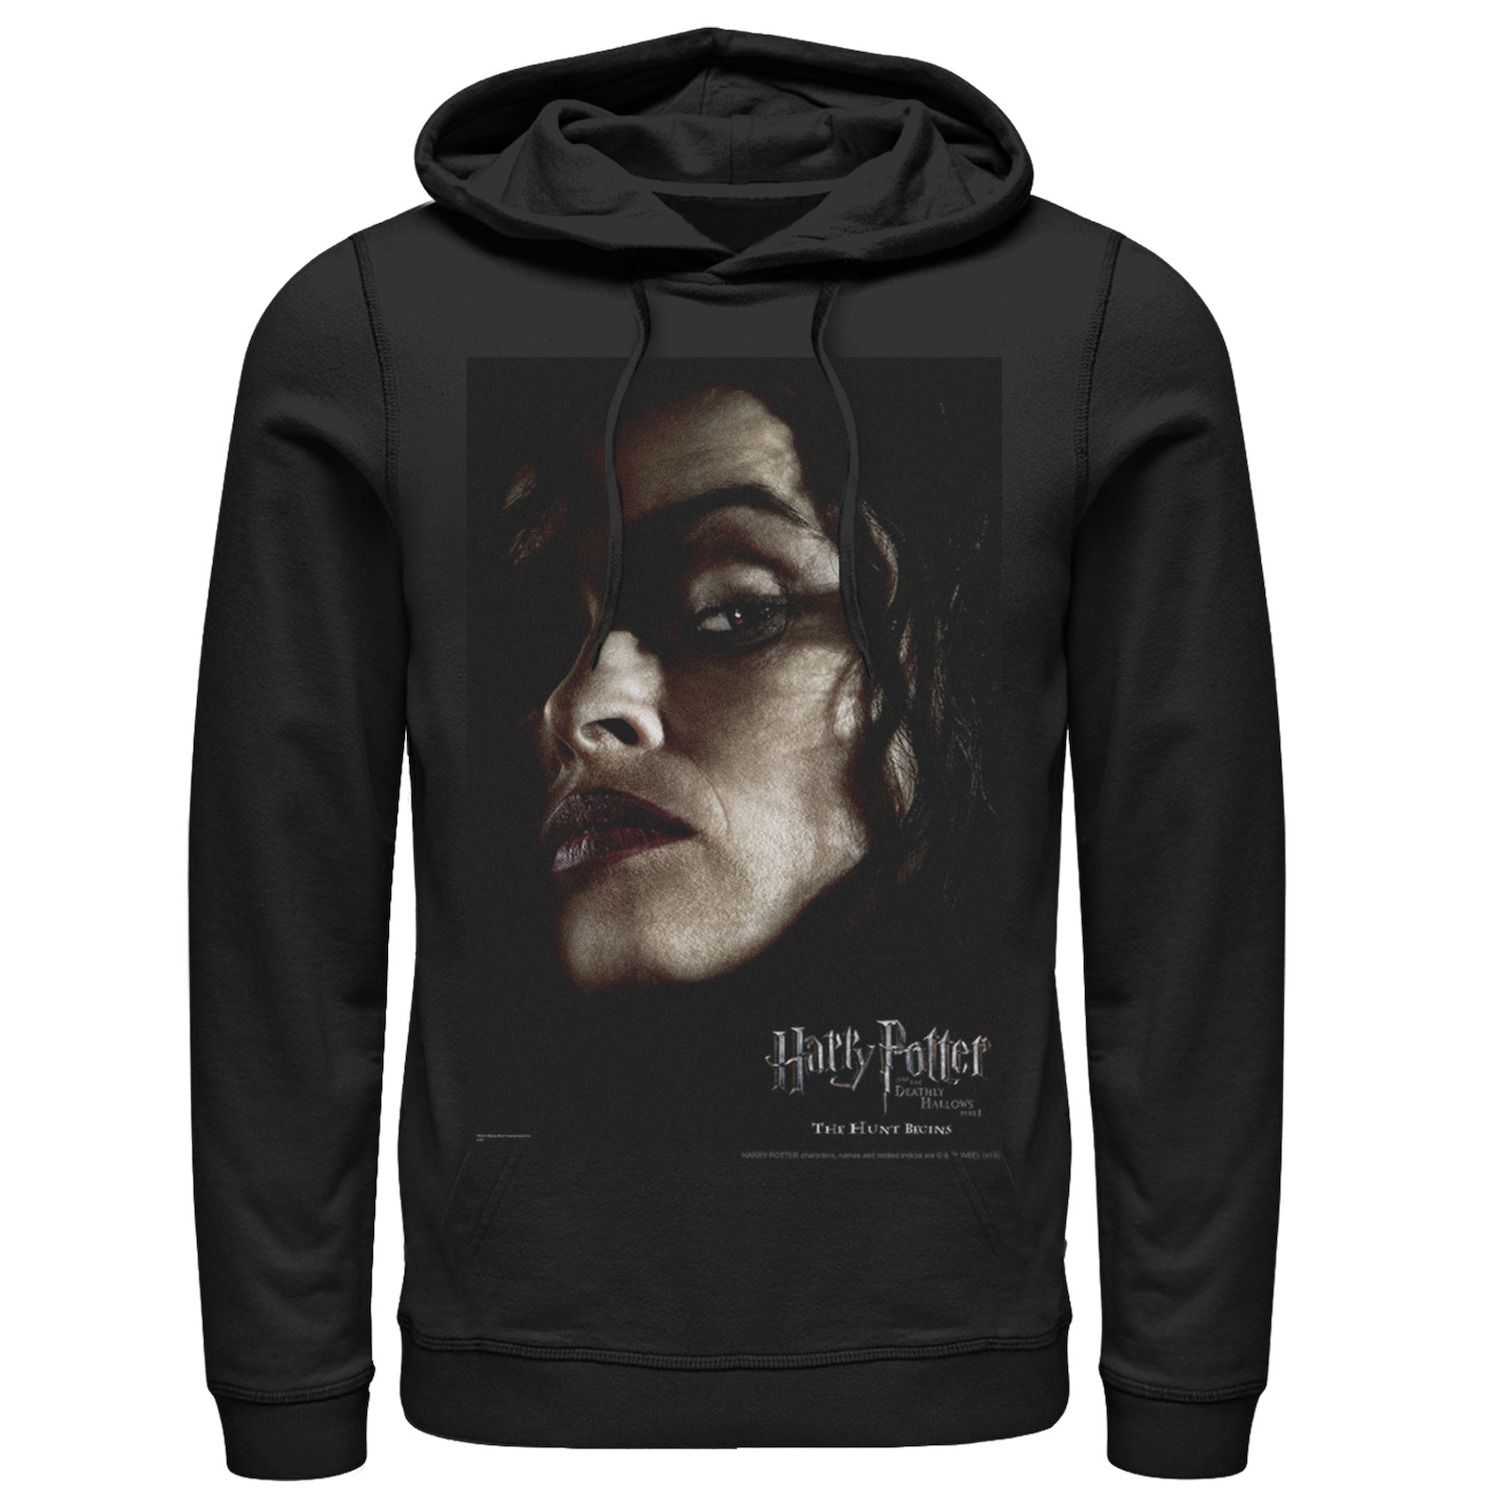 Image for Harry Potter Men's Deathly Hallows Bellatrix Character Poster Graphic Pullover Hoodie at Kohl's.